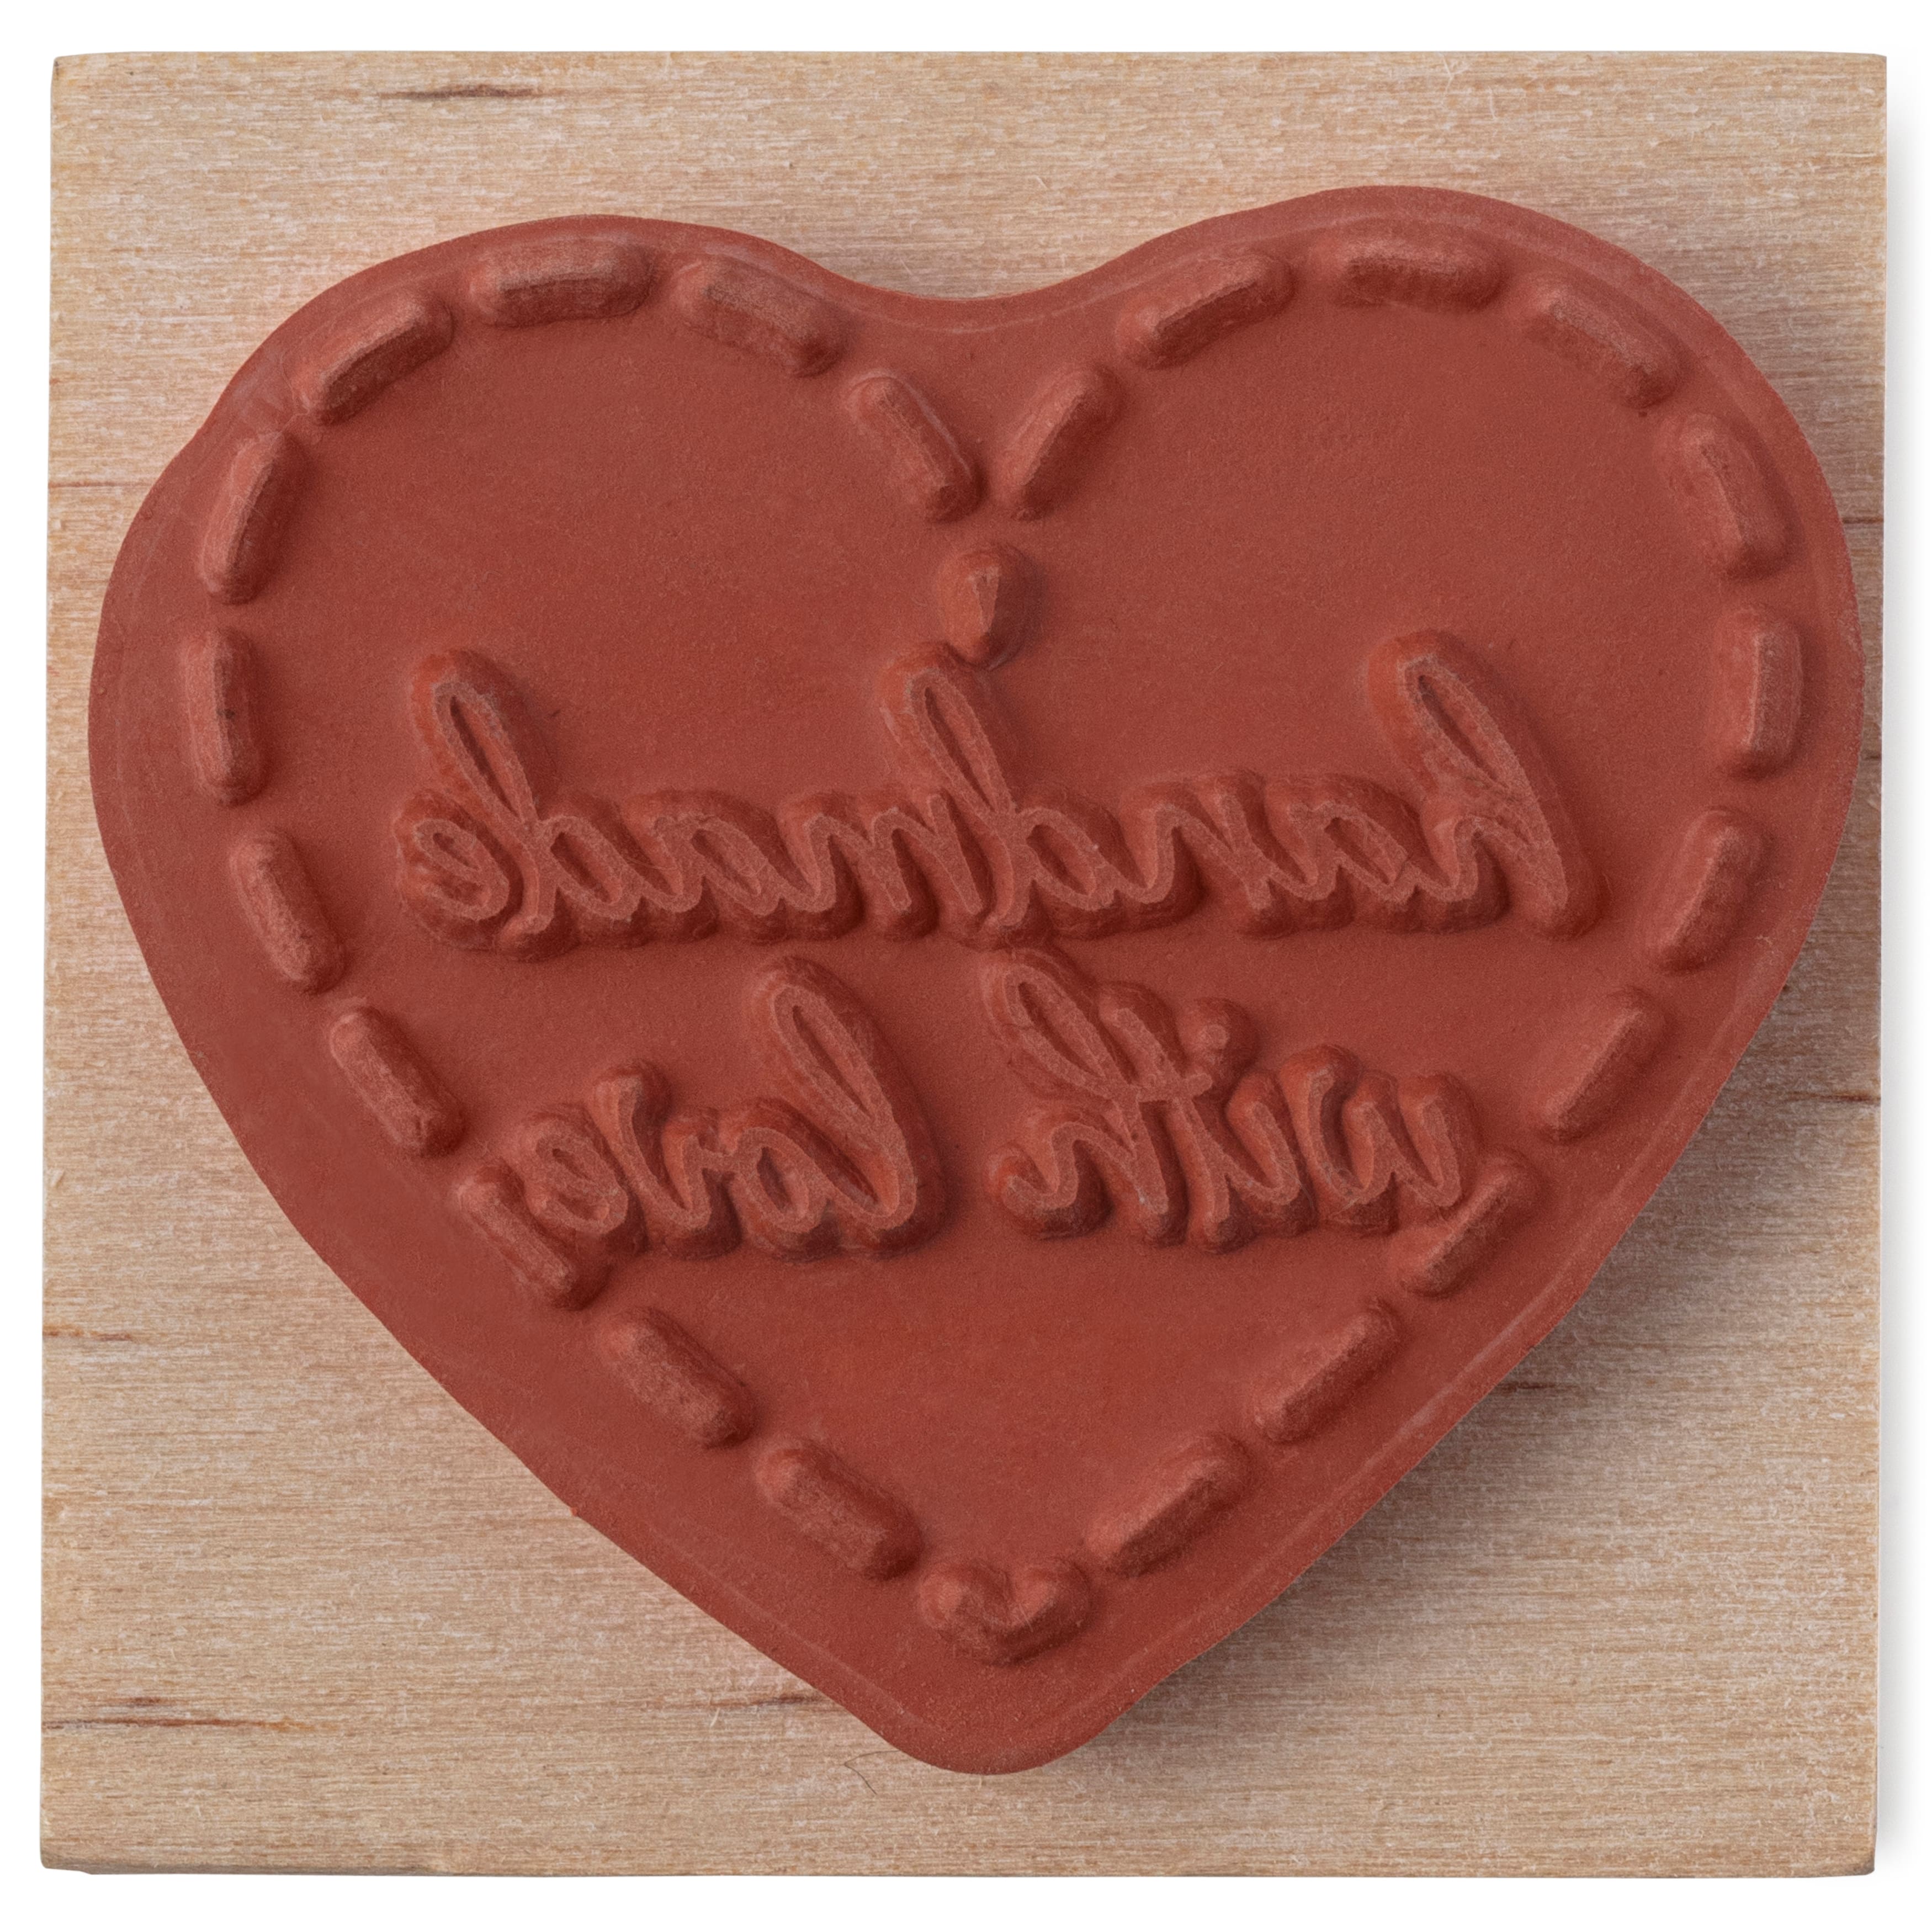 Handmade with Love Wood Stamp by Recollections&#x2122;